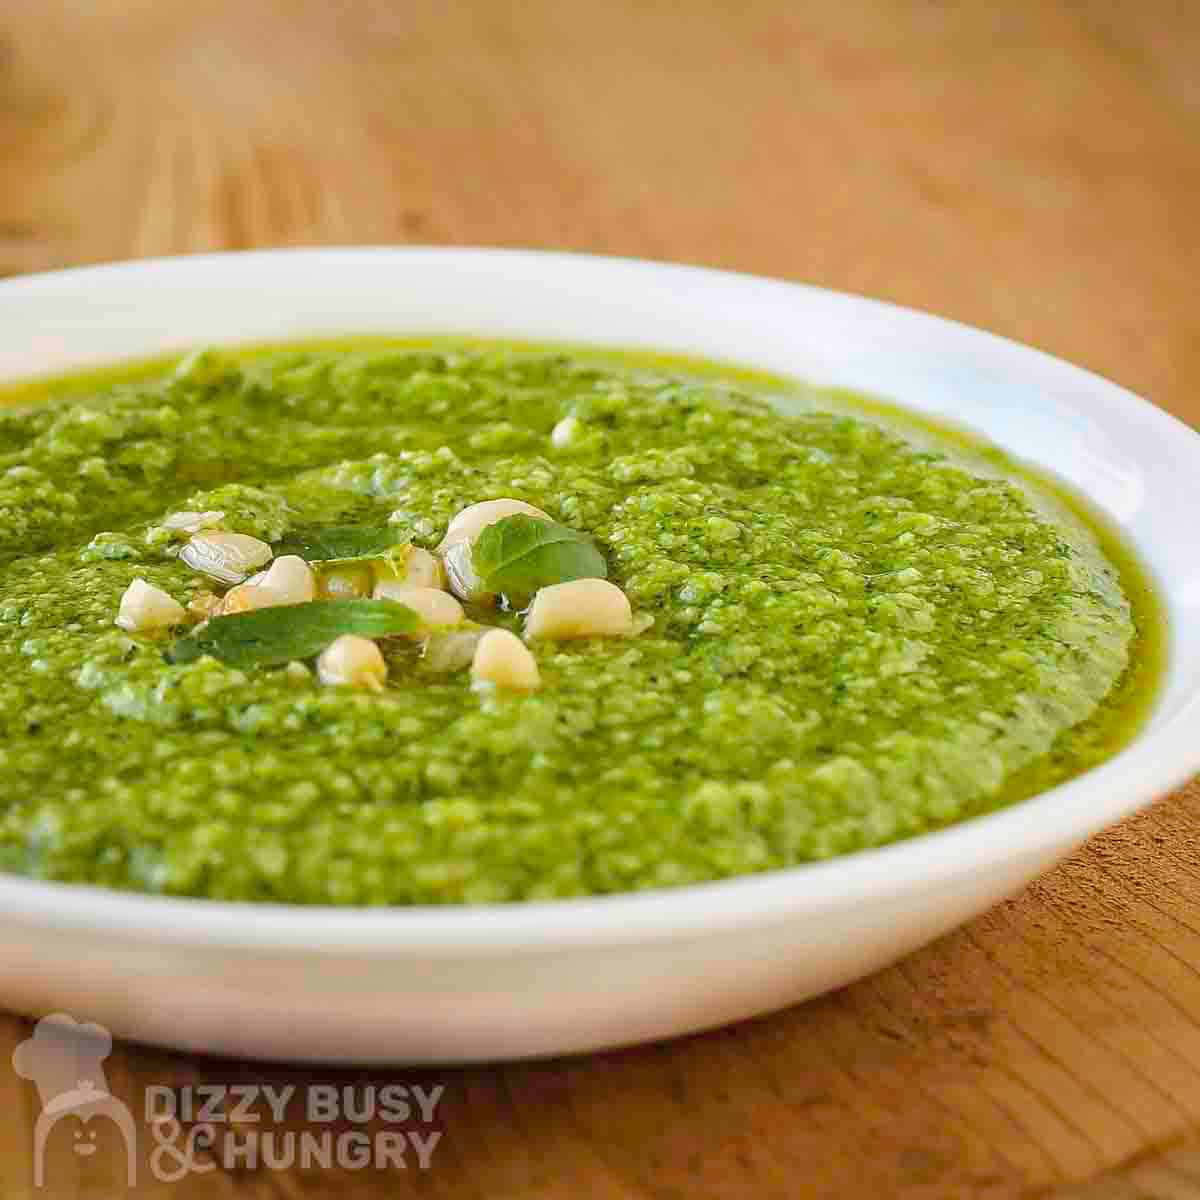 Side close up view of broccoli pesto in a white bowl garnished with basil and pine nuts with more basil on a wooden cutting board in the background.